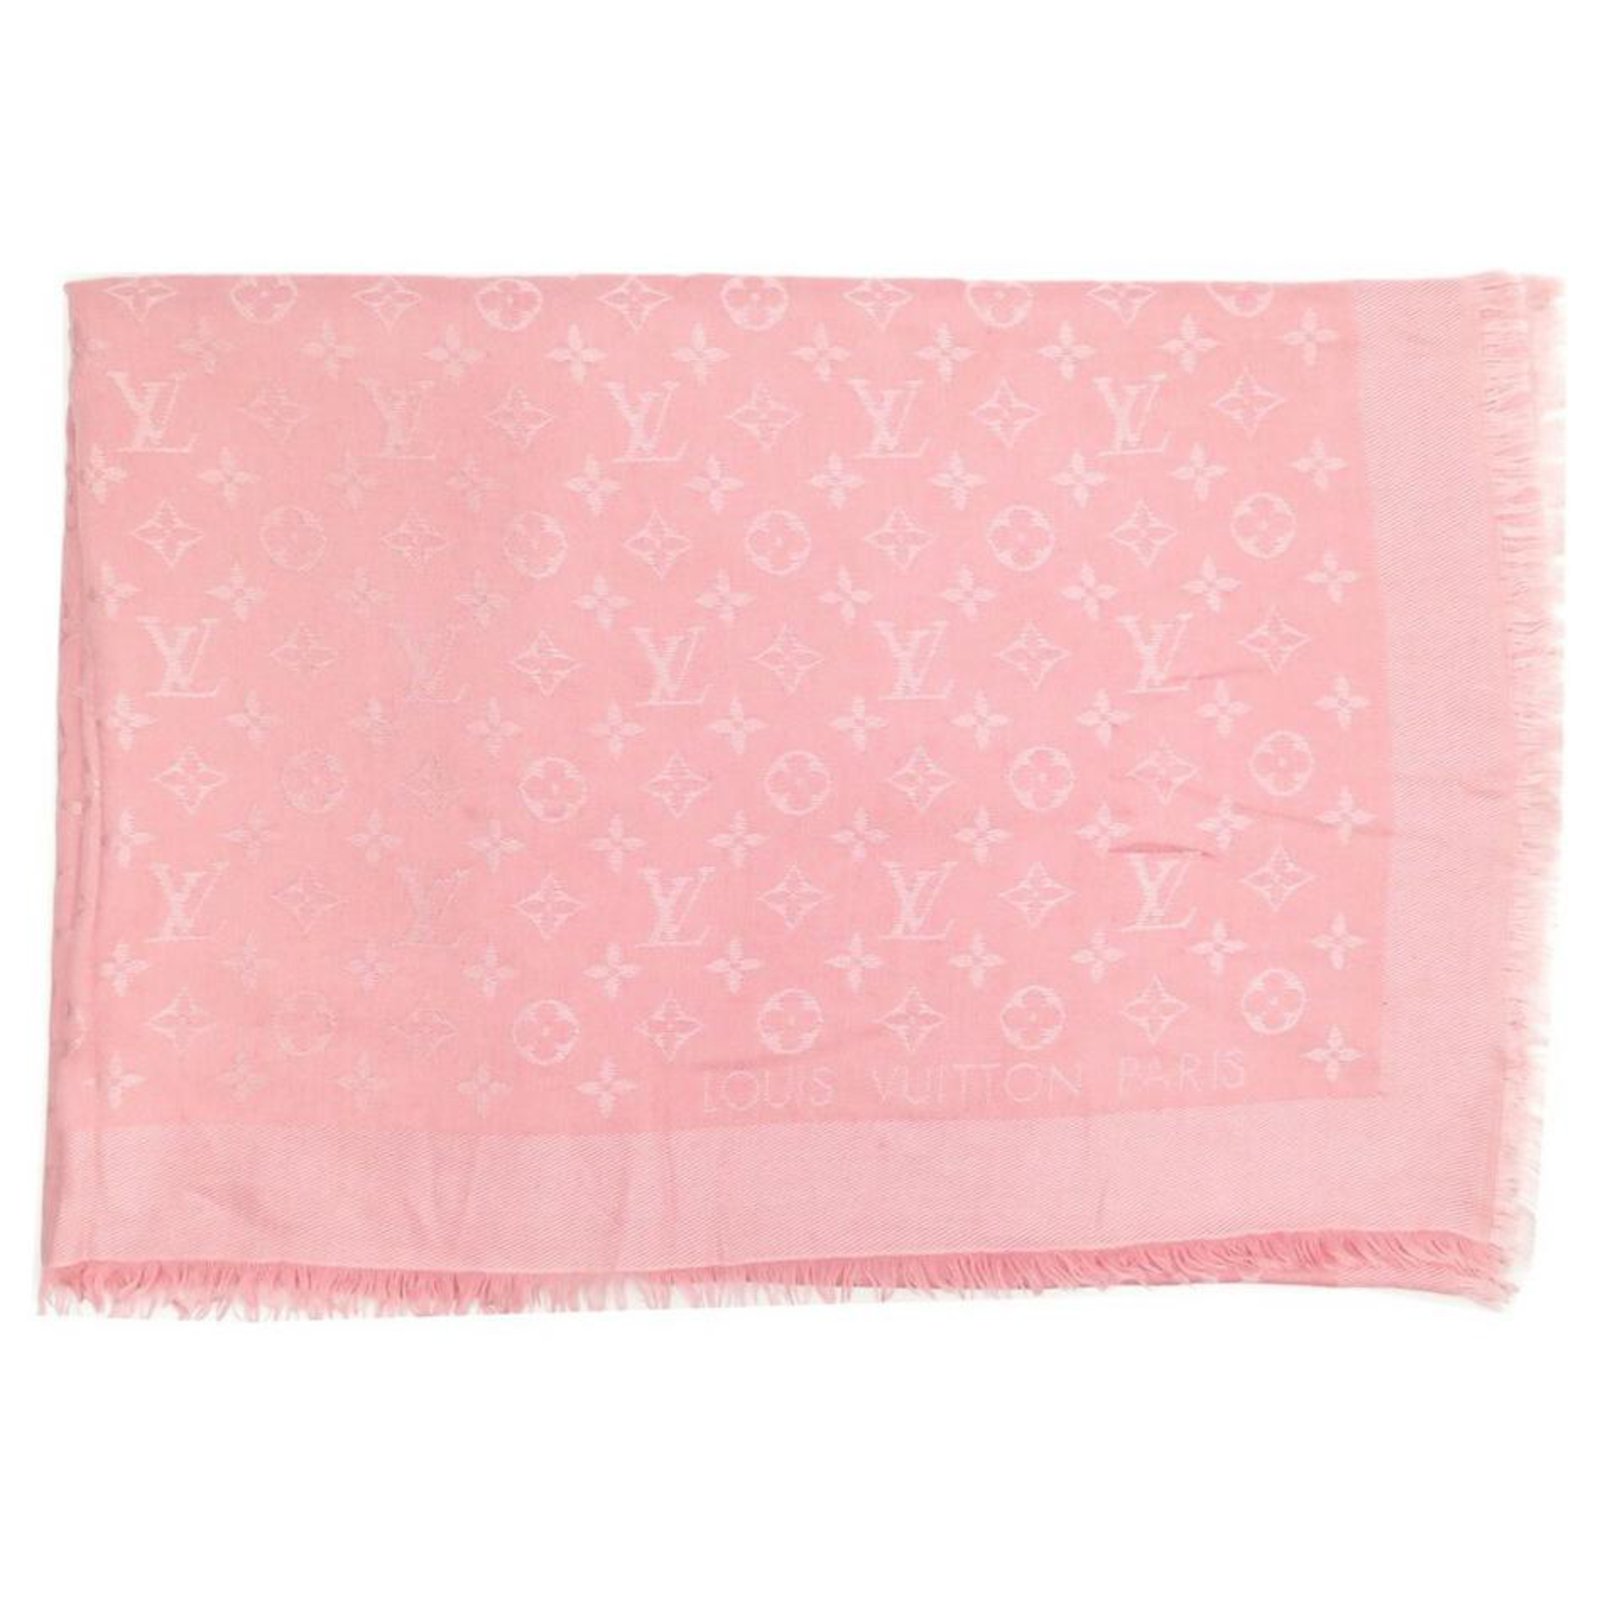 Louis Vuitton Chale Monogram Silk Scarf - Pink Scarves and Shawls